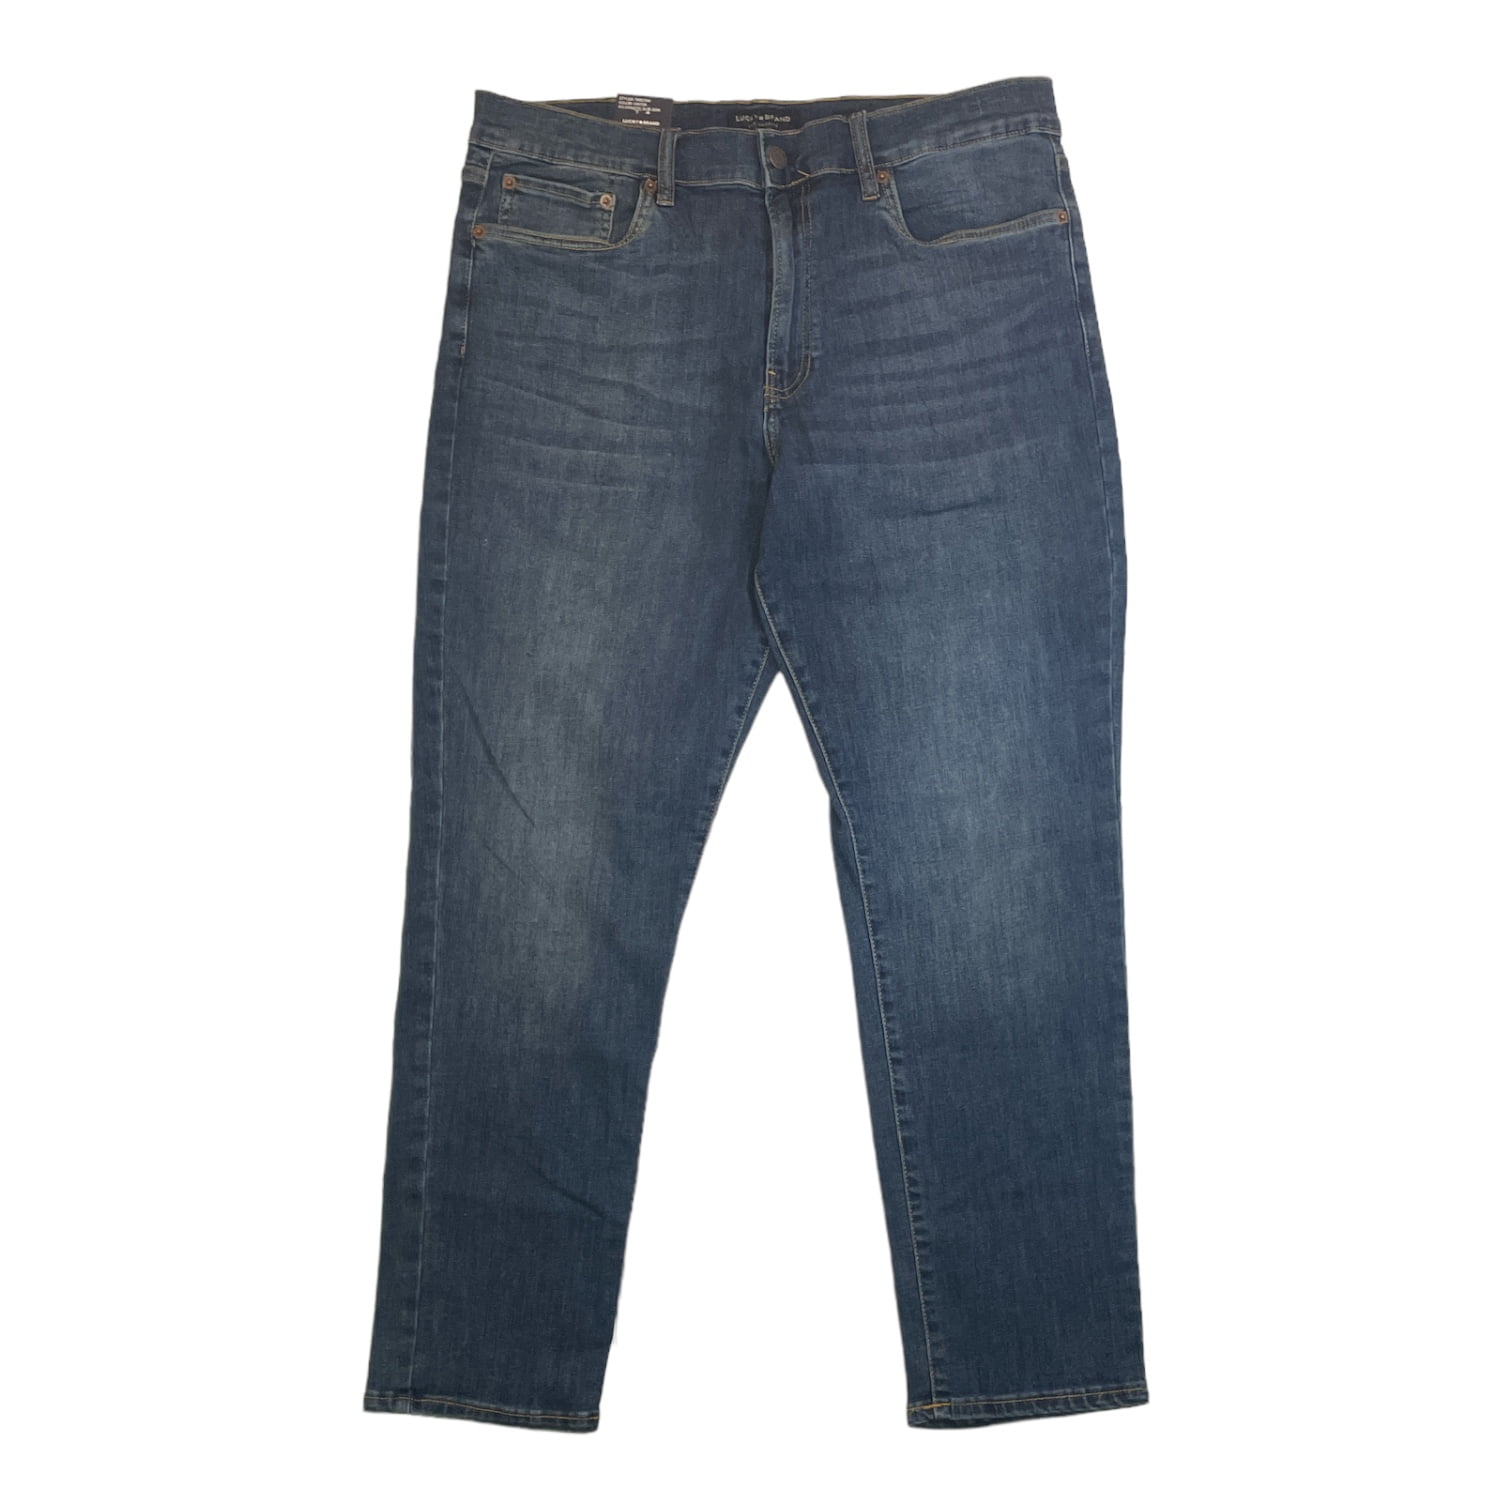 Lucky Brand 412 Athletic Slim Coolmax Jean - ShopStyle